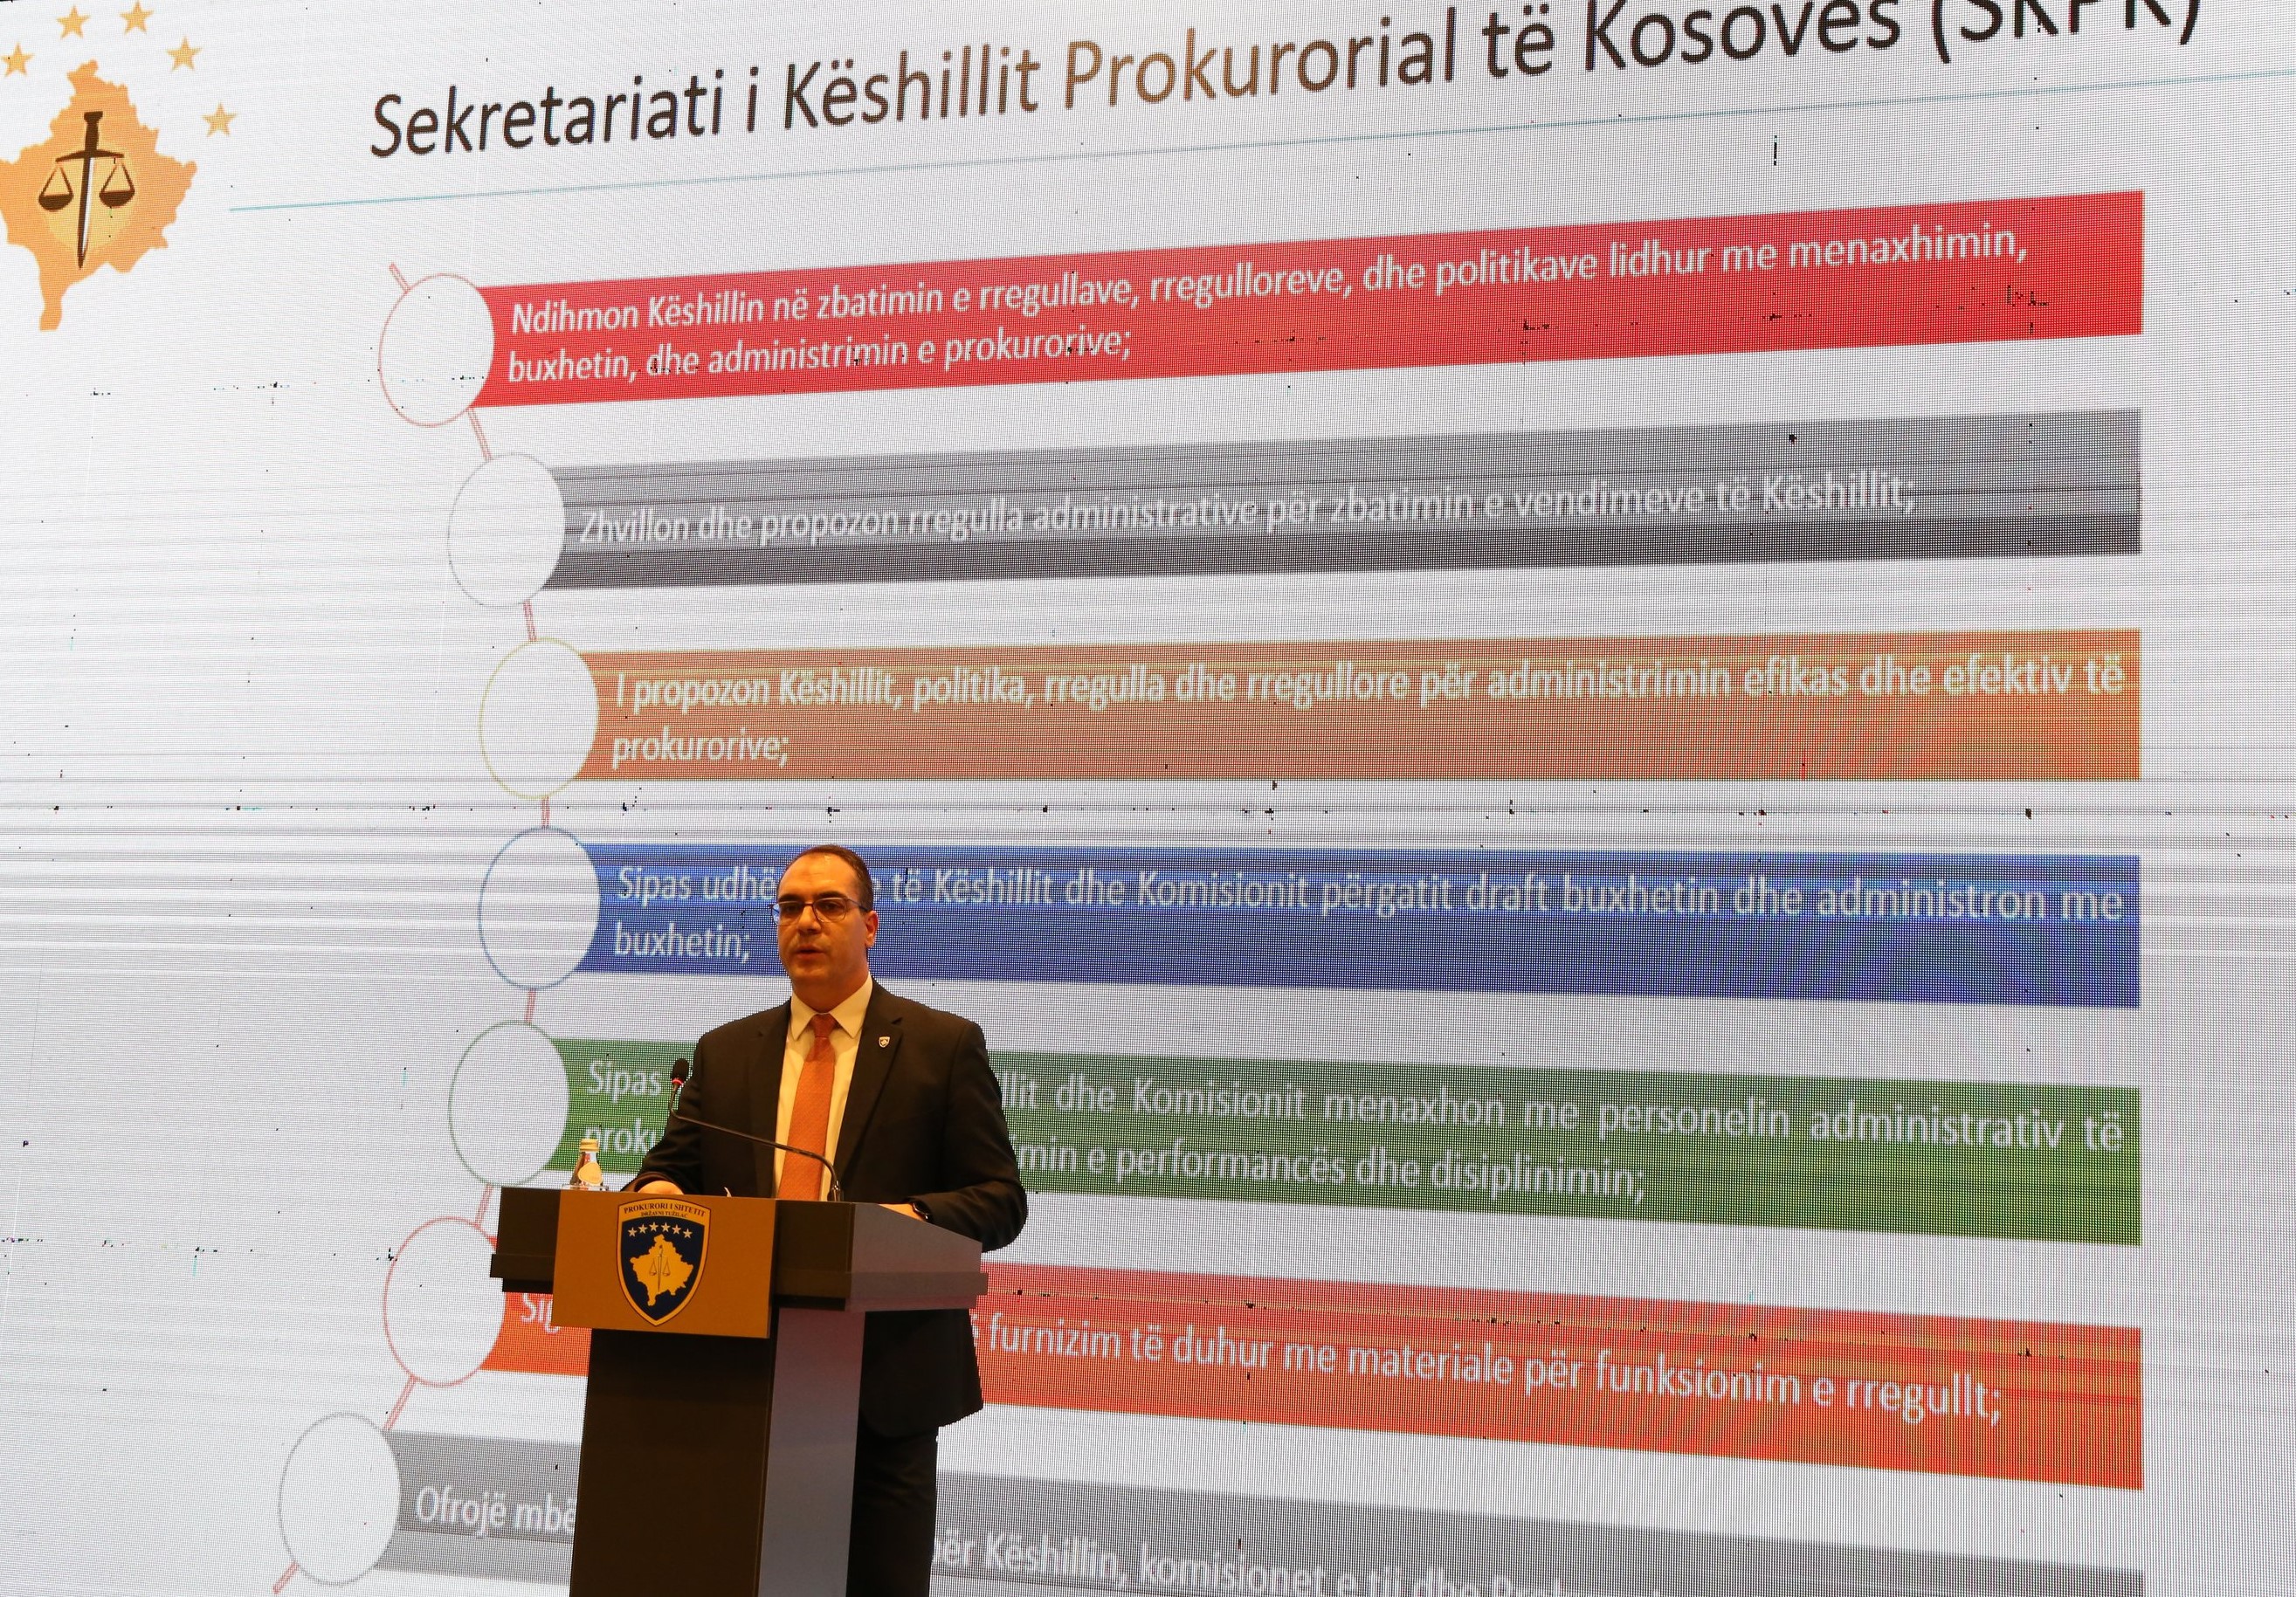 Developments in the administration of the Kosovo prosecutorial system are presented